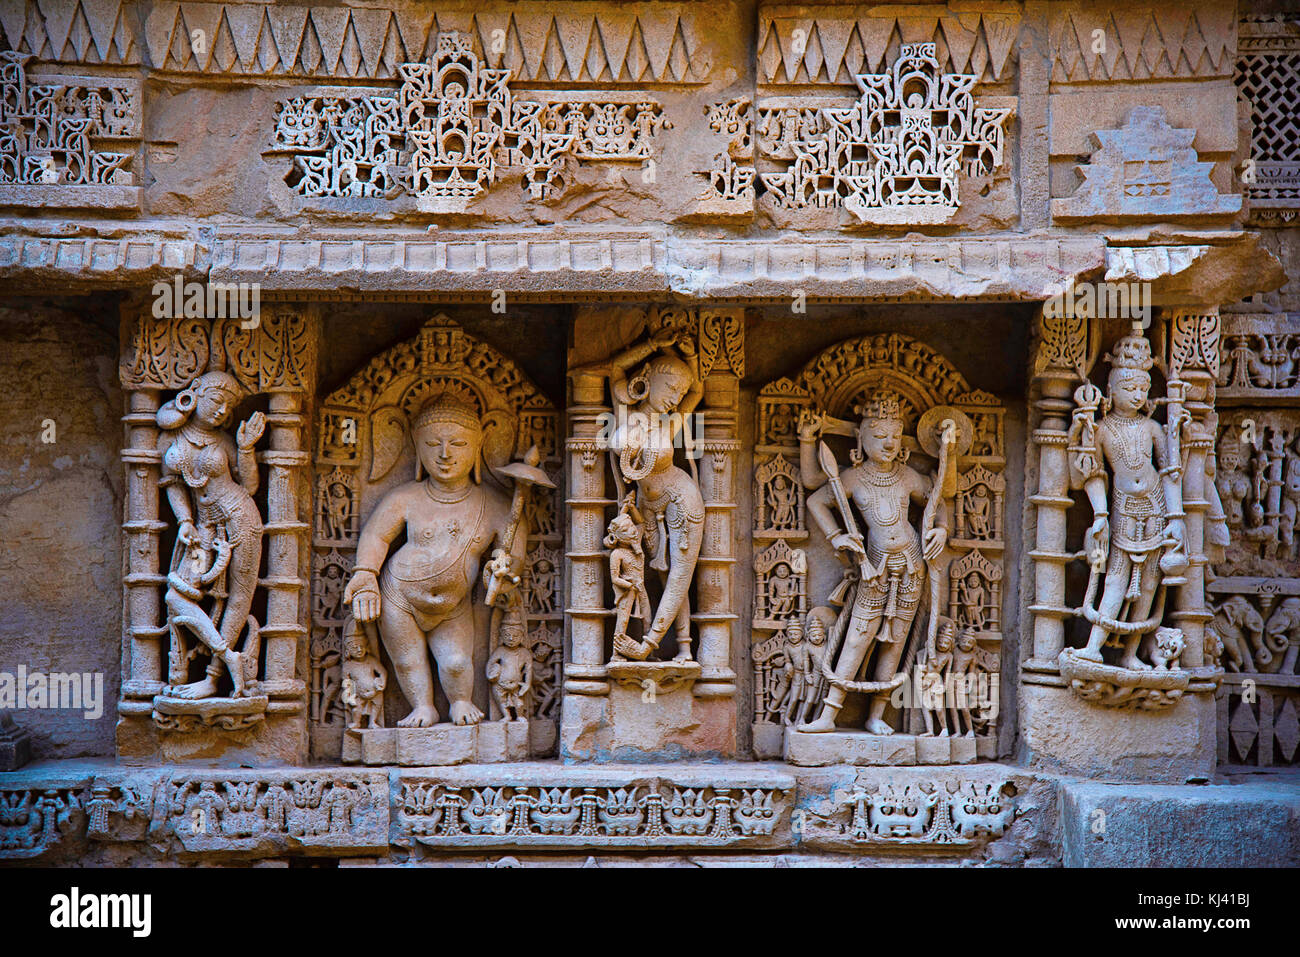 Carved idols of Vamana, Lord Parshuram surrounded by apsaras. Patan in Gujarat, India. Stock Photo